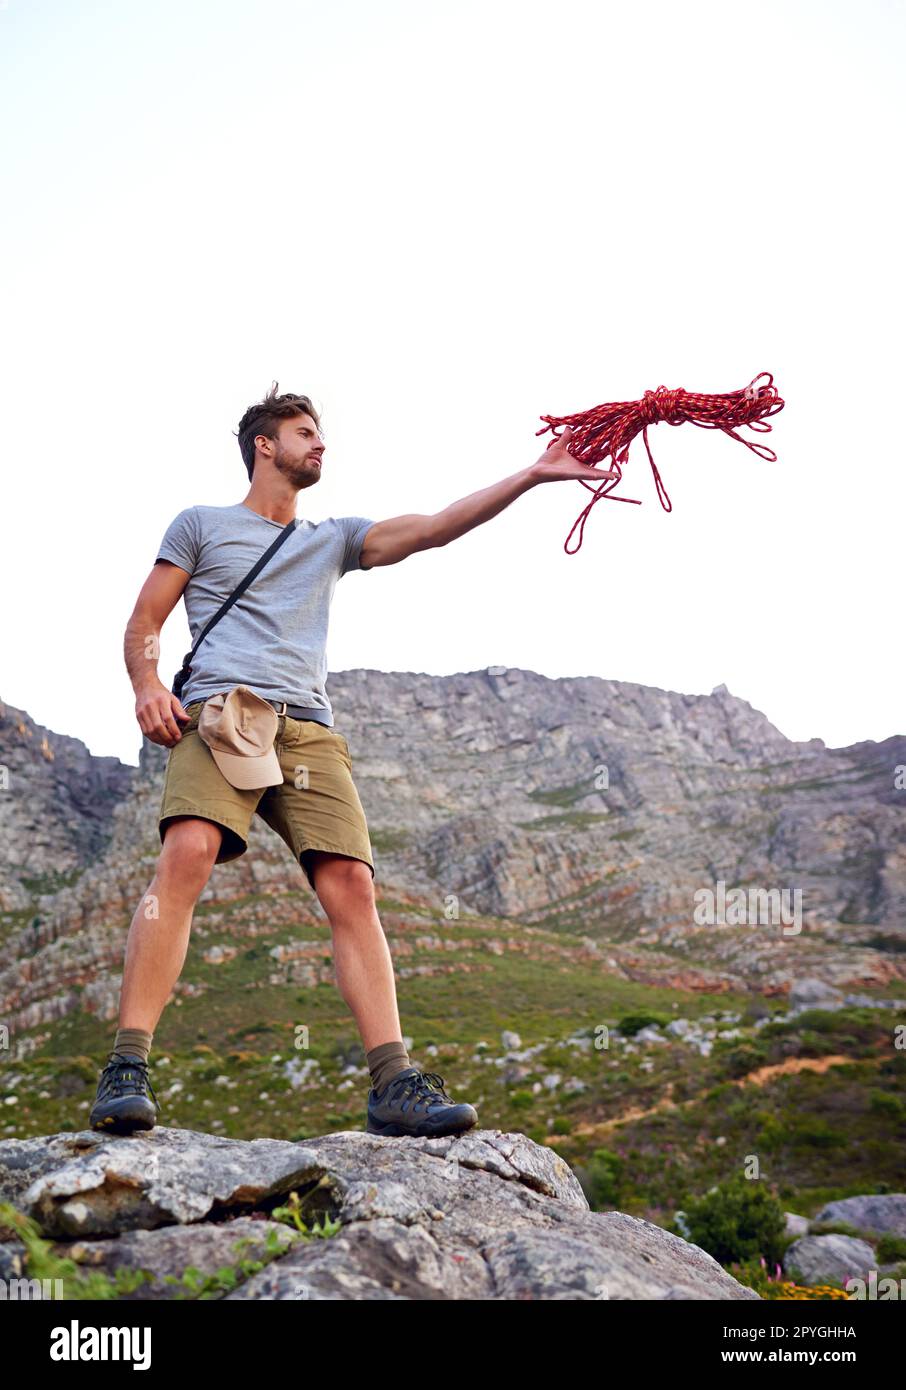 https://c8.alamy.com/comp/2PYGHHA/dont-forget-your-rope-full-length-shot-of-a-handsome-young-man-throwing-a-rope-while-hiking-2PYGHHA.jpg